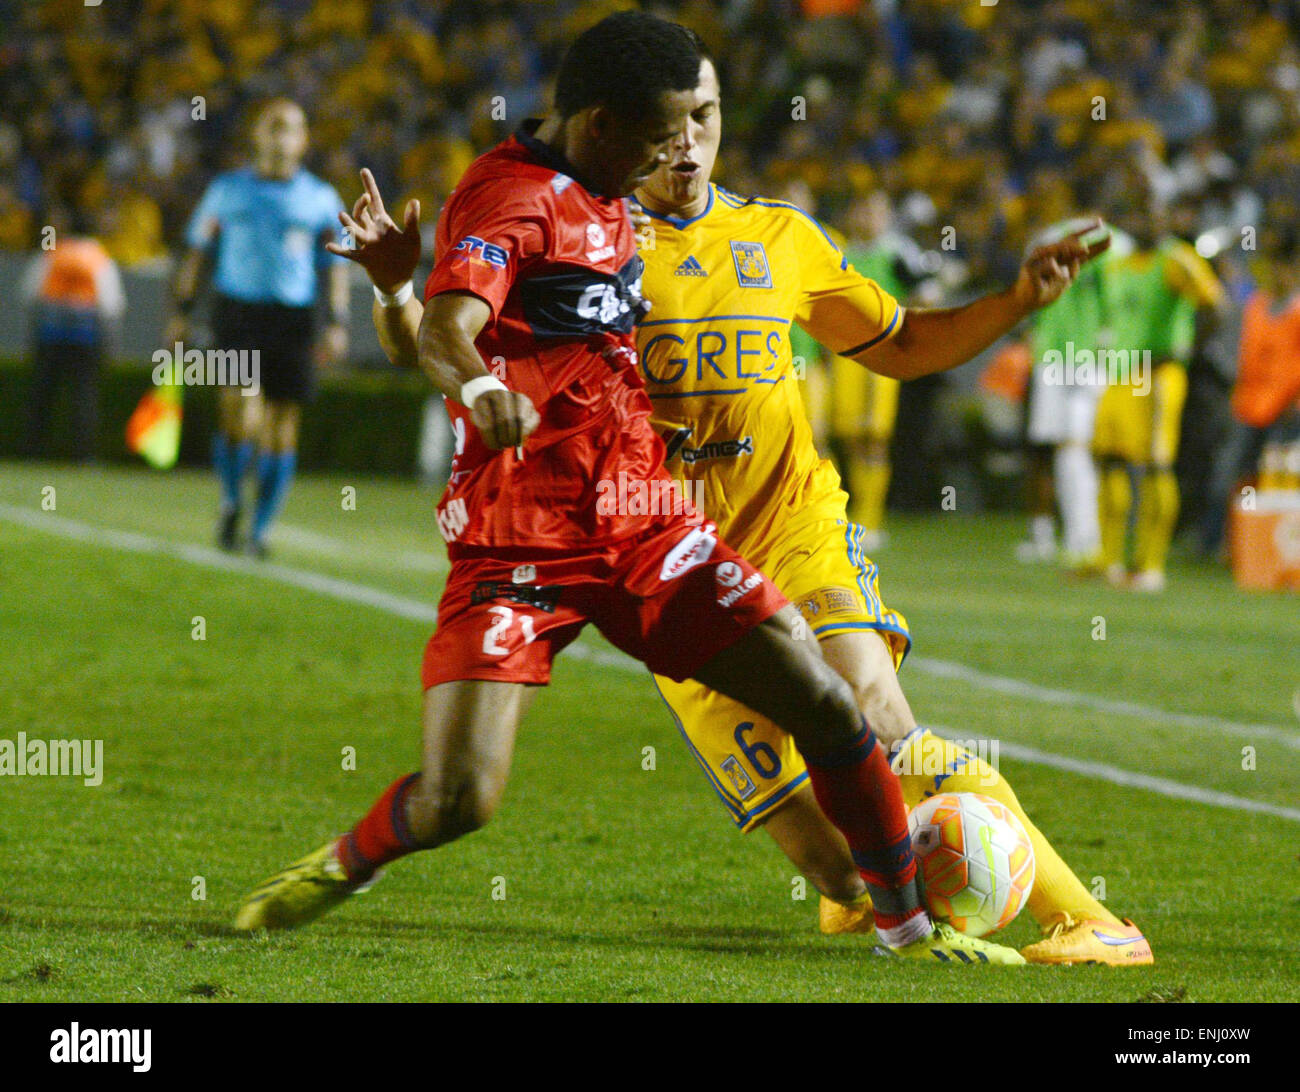 Monterrey, Mexico. 5th May, 2015. Jorge Torres Nilo (R) of Mexico's Tigres vies for the ball during a match against Bolivia's Universitario de Sucre at Libertadores Cup 2015, in Monterrey City, Mexico, on May 5, 2015. © Juan Carlos Perez/NOTIMEX/Xinhua/Alamy Live News Stock Photo